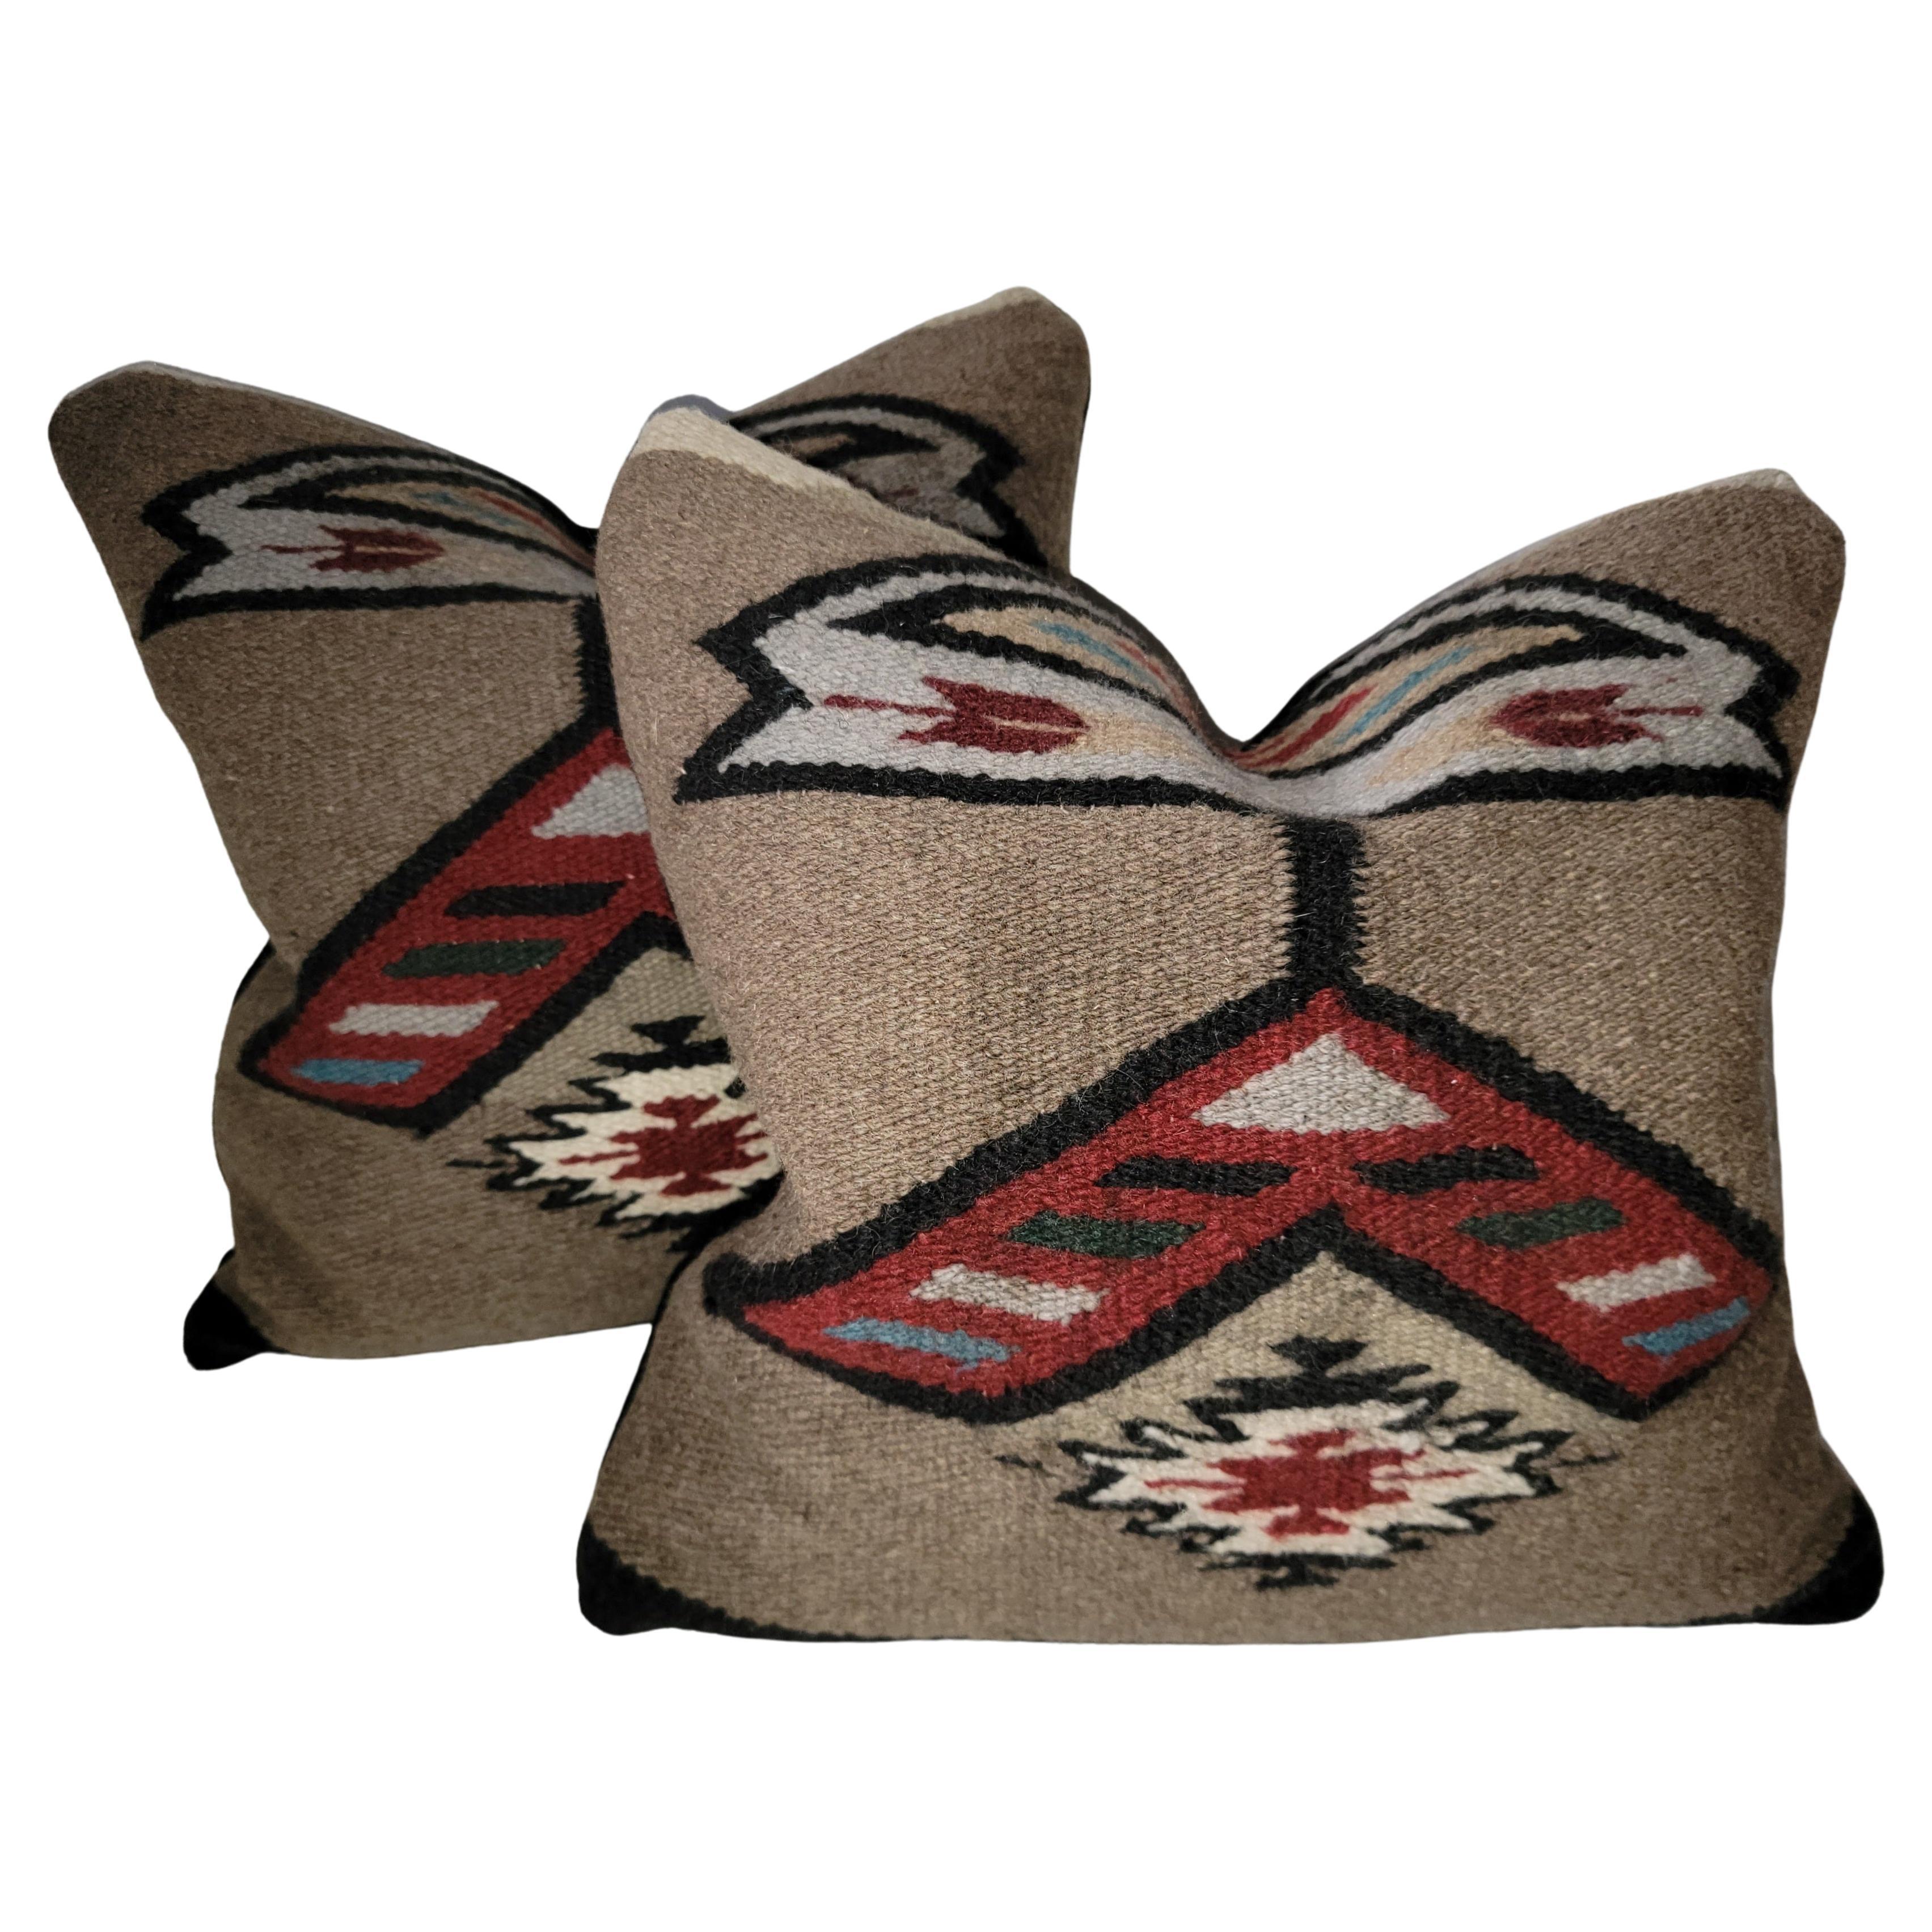 Mexican Indian Weaving Pillows with Arrows - Pair